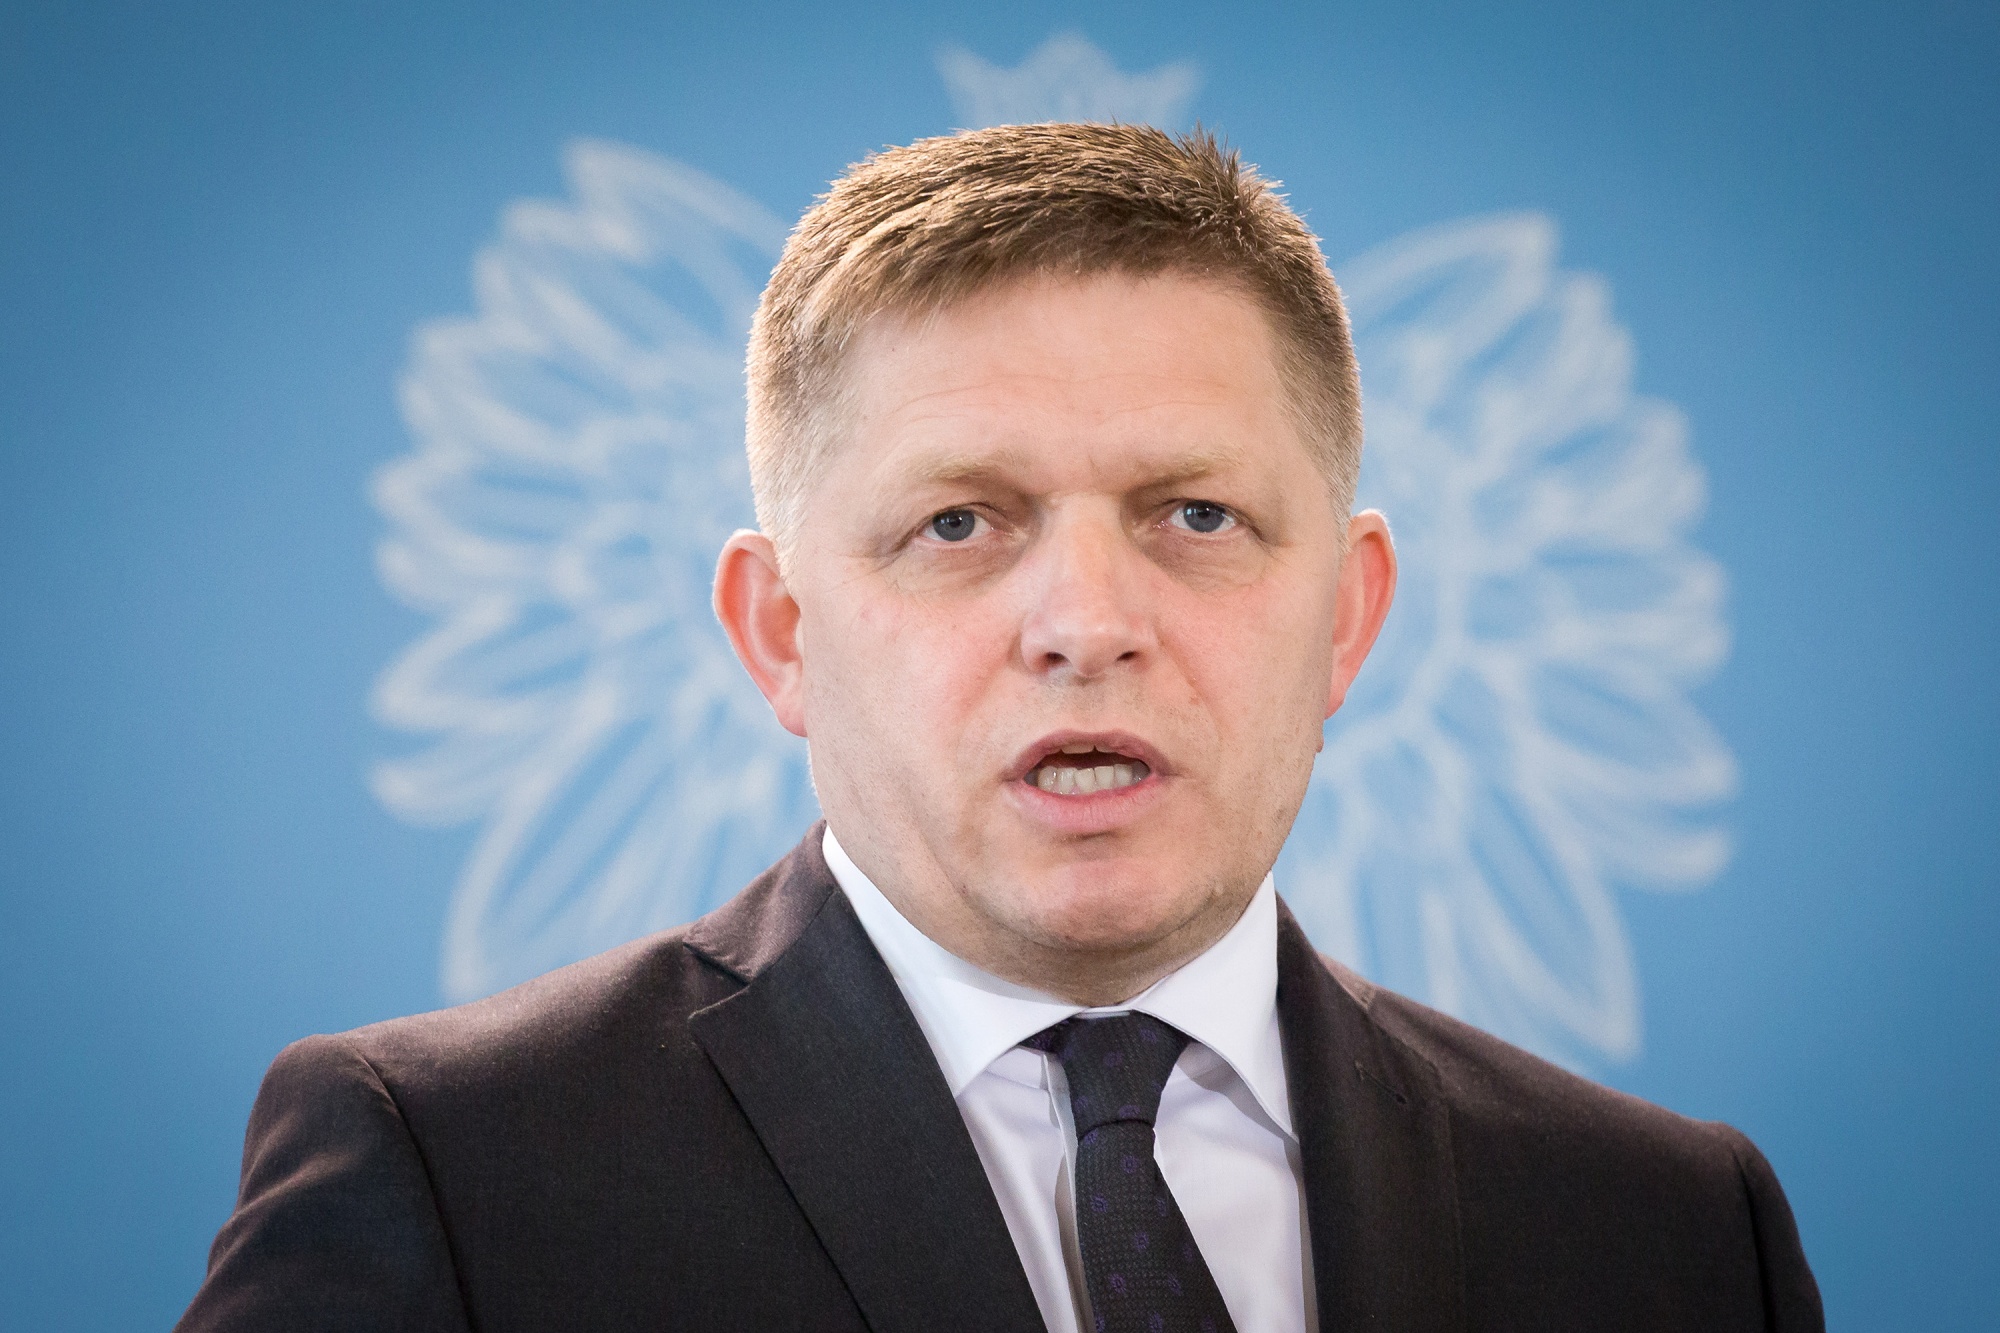 Robert Fico during the press conference in Warsaw on May 31, 2017